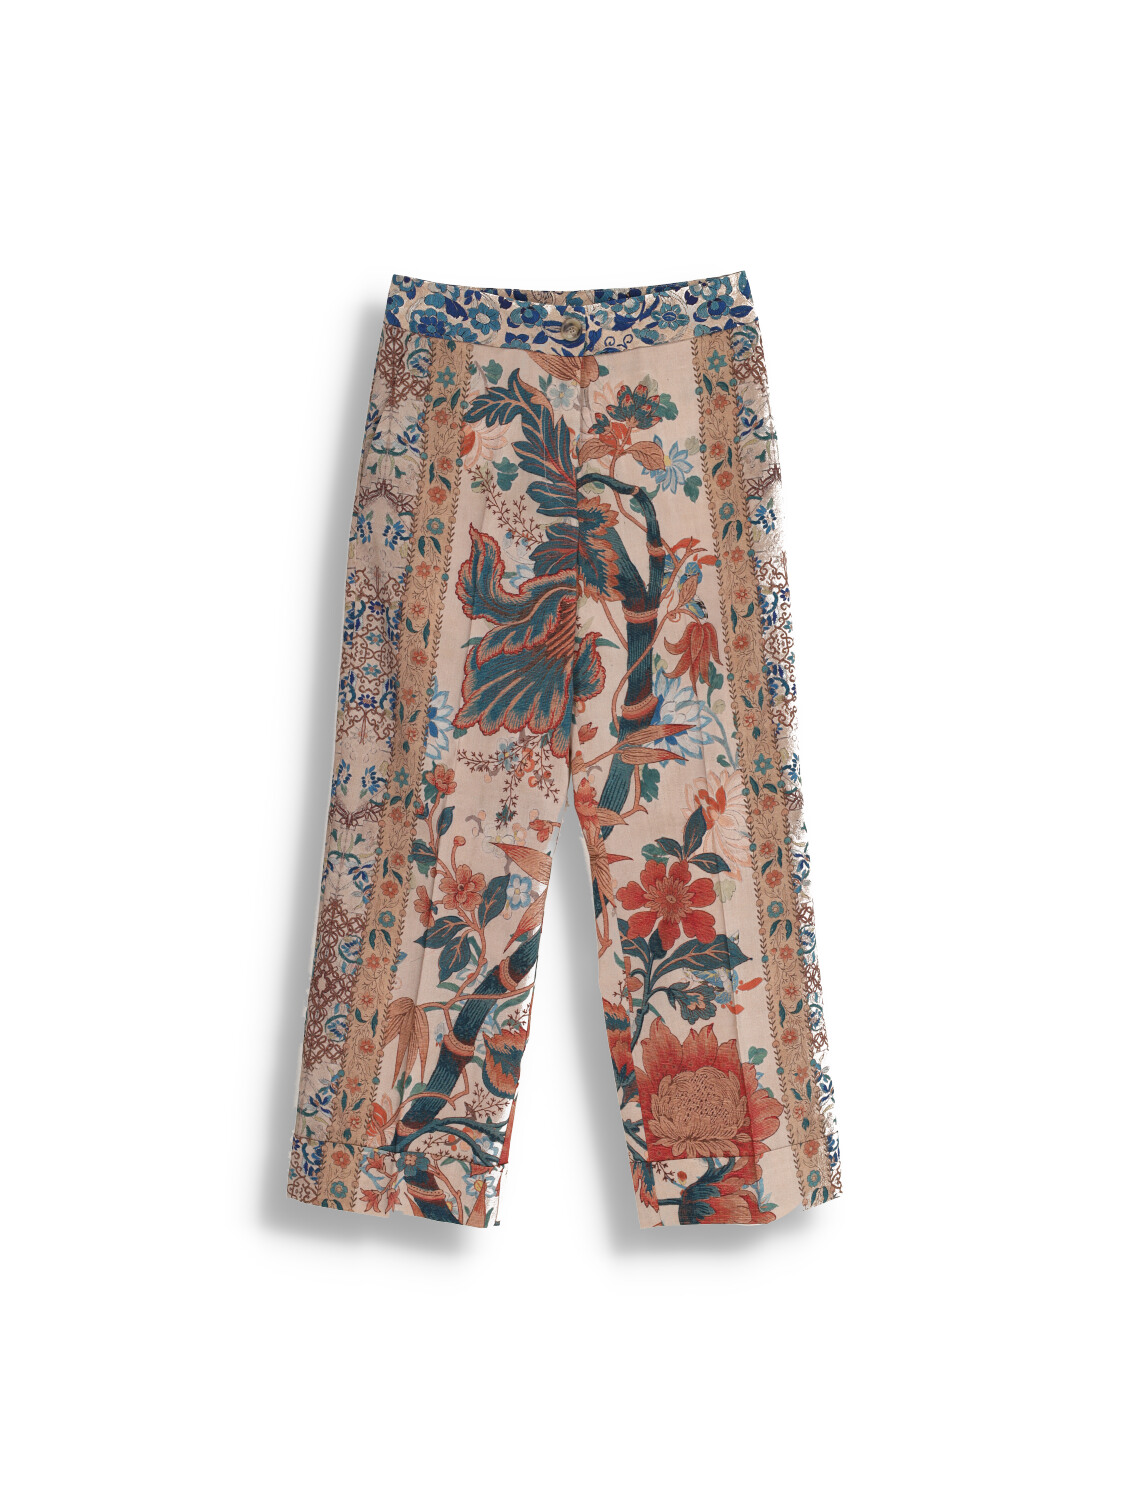 Dylan - Pants in virgin wool with a floral print